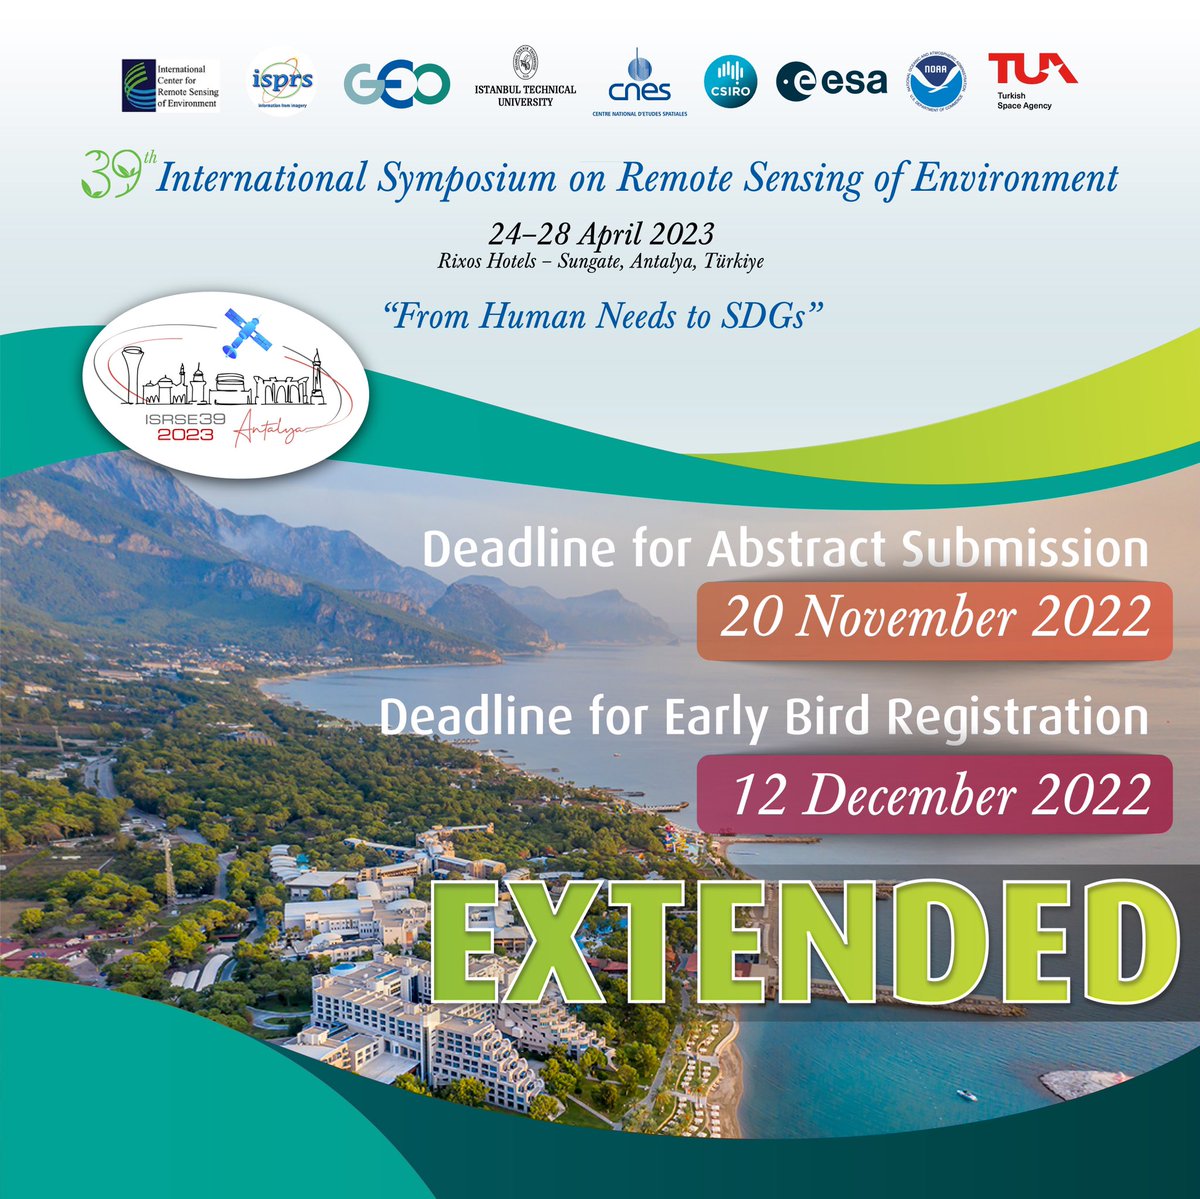 Deadlines for abstract submission and early bird registration have been extended #isrse39 #abstractsubmission #earlybirdregistration #extended